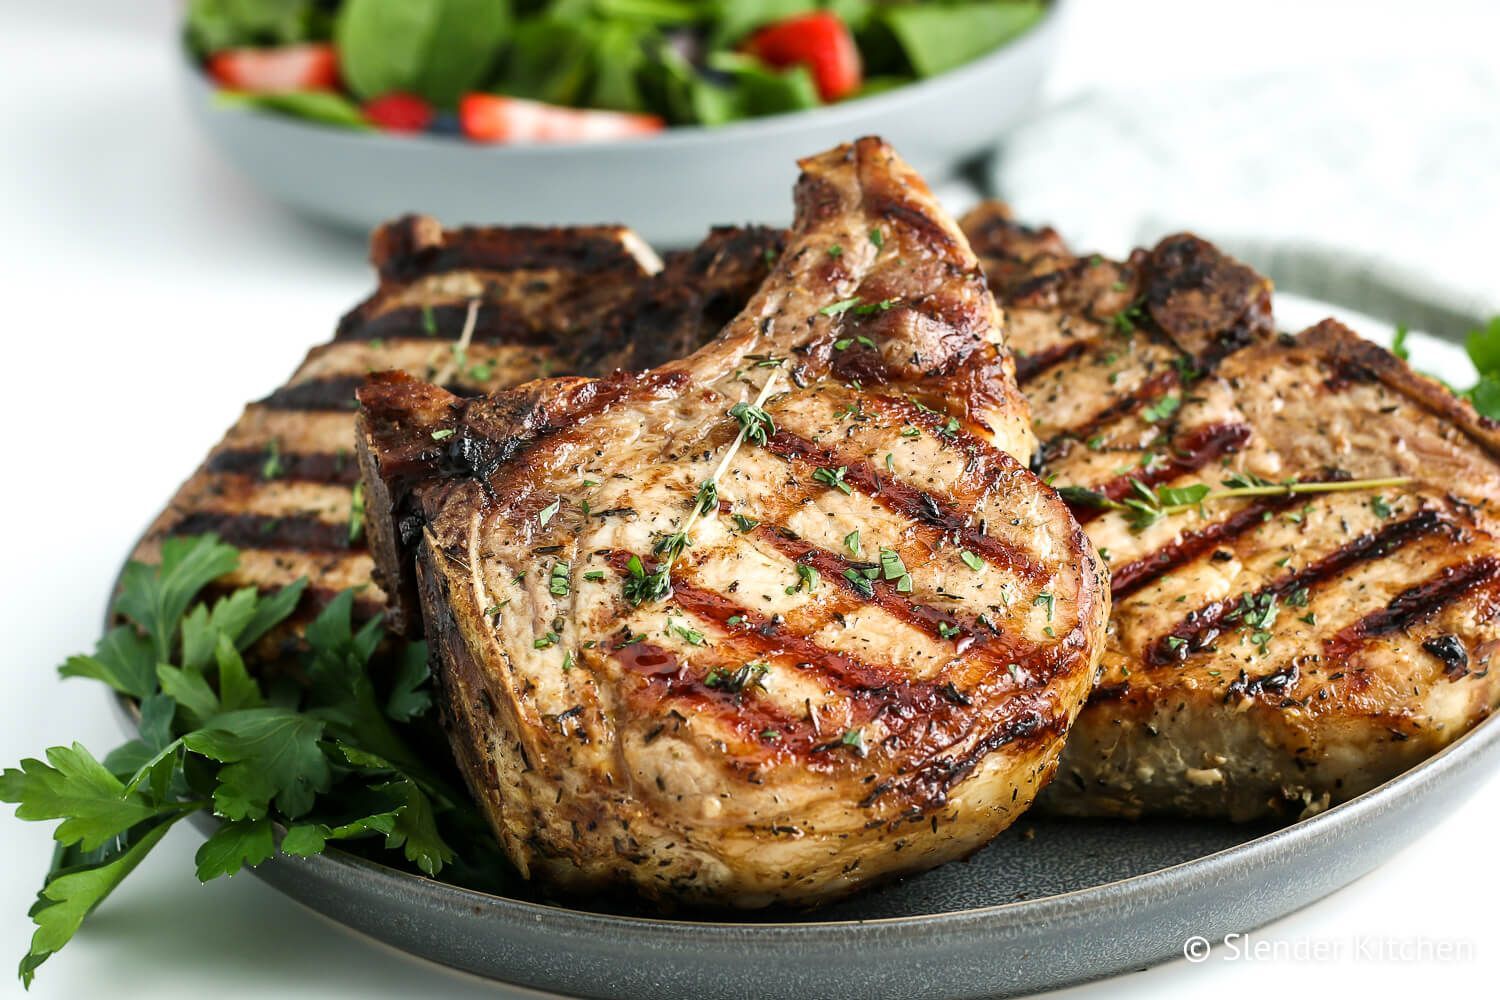 Grilled pork chops with grill marks and fresh thyme on a plate.